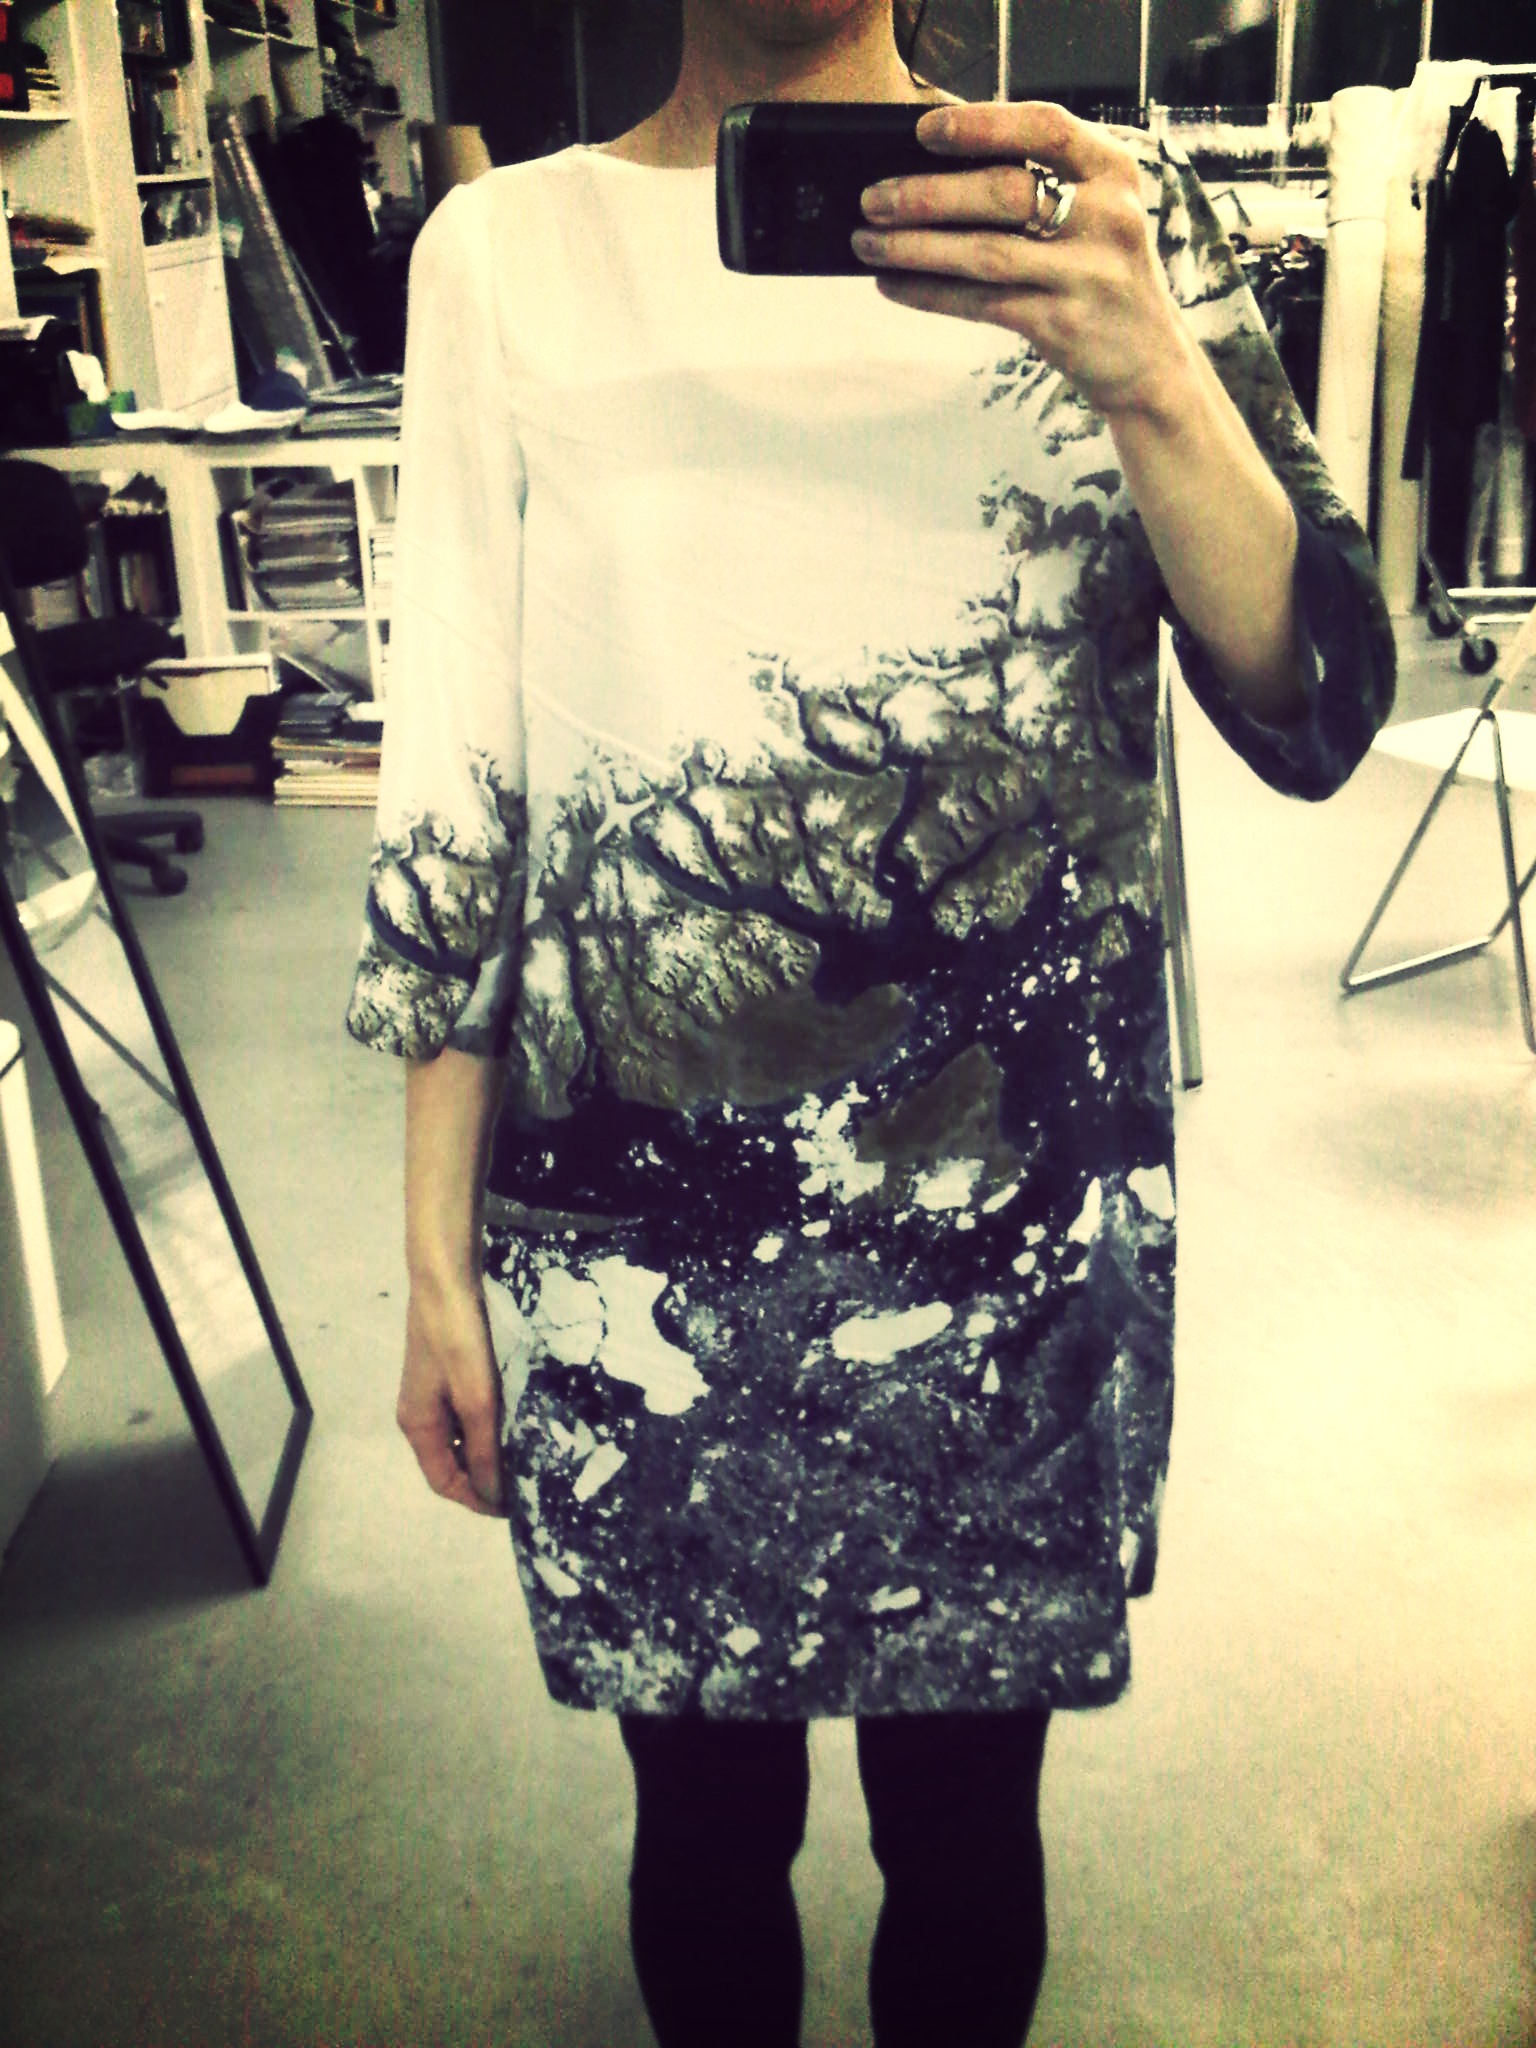 sneak peek on our new dress co-created with valérie dumaine #earth #nasa #creativecommons @slowfactory_